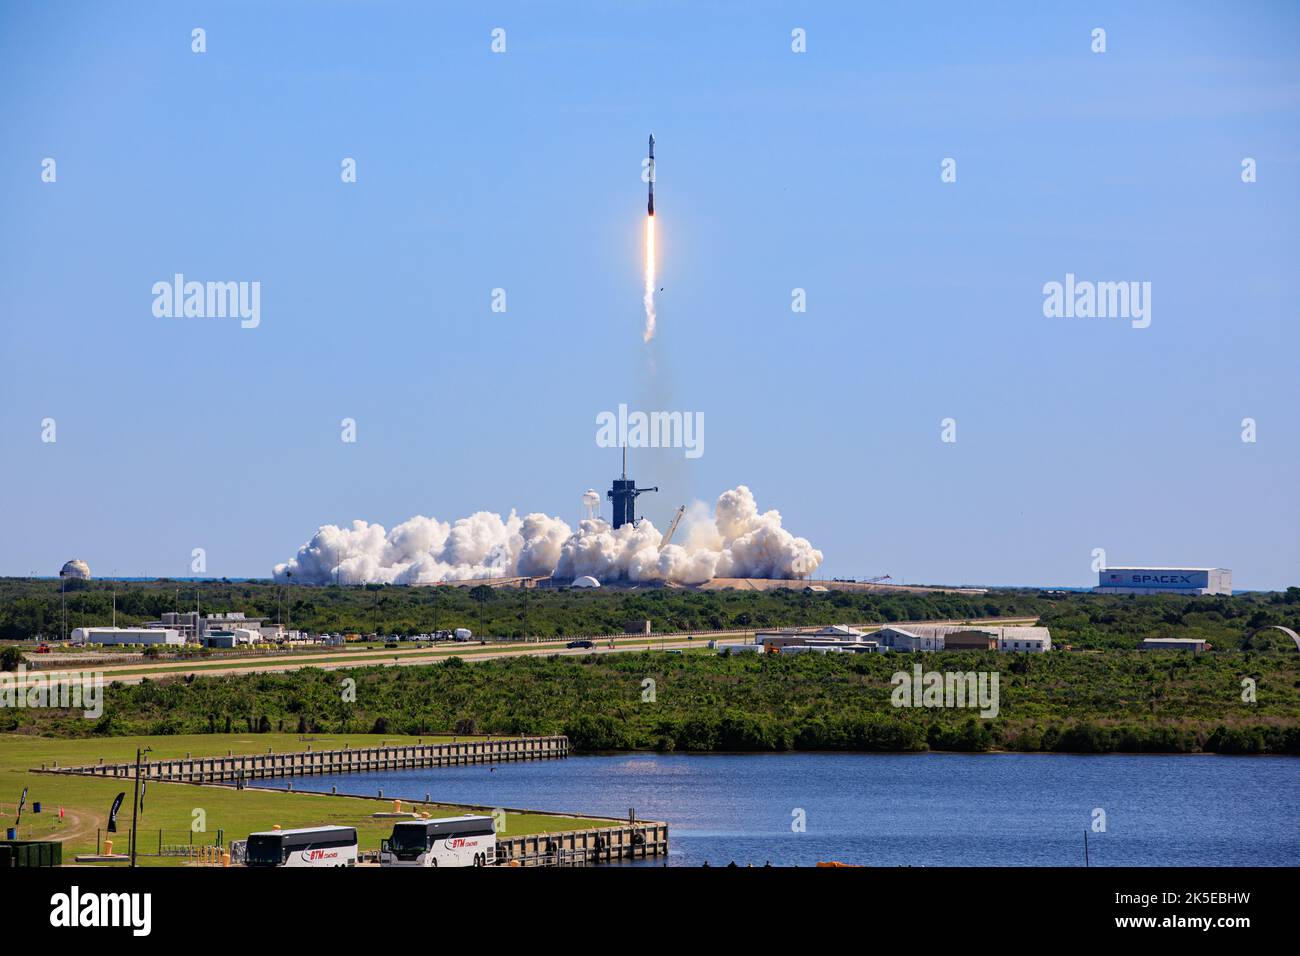 A SpaceX Falcon 9 rocket, carrying the company's Crew Dragon spacecraft, lifts off from Launch Complex 39A at NASA’s Kennedy Space Center in Florida at 11:17 a.m. EST on April 8, 2022, on Axiom Mission 1 (Ax-1). Commander Michael López-Alegría of Spain and the United States, Pilot Larry Connor of the United States, and Mission Specialists Eytan Stibbe of Israel, and Mark Pathy of Canada are aboard the flight to the International Space Station. The Ax-1 mission is the first private astronaut mission to the space station. Stock Photo